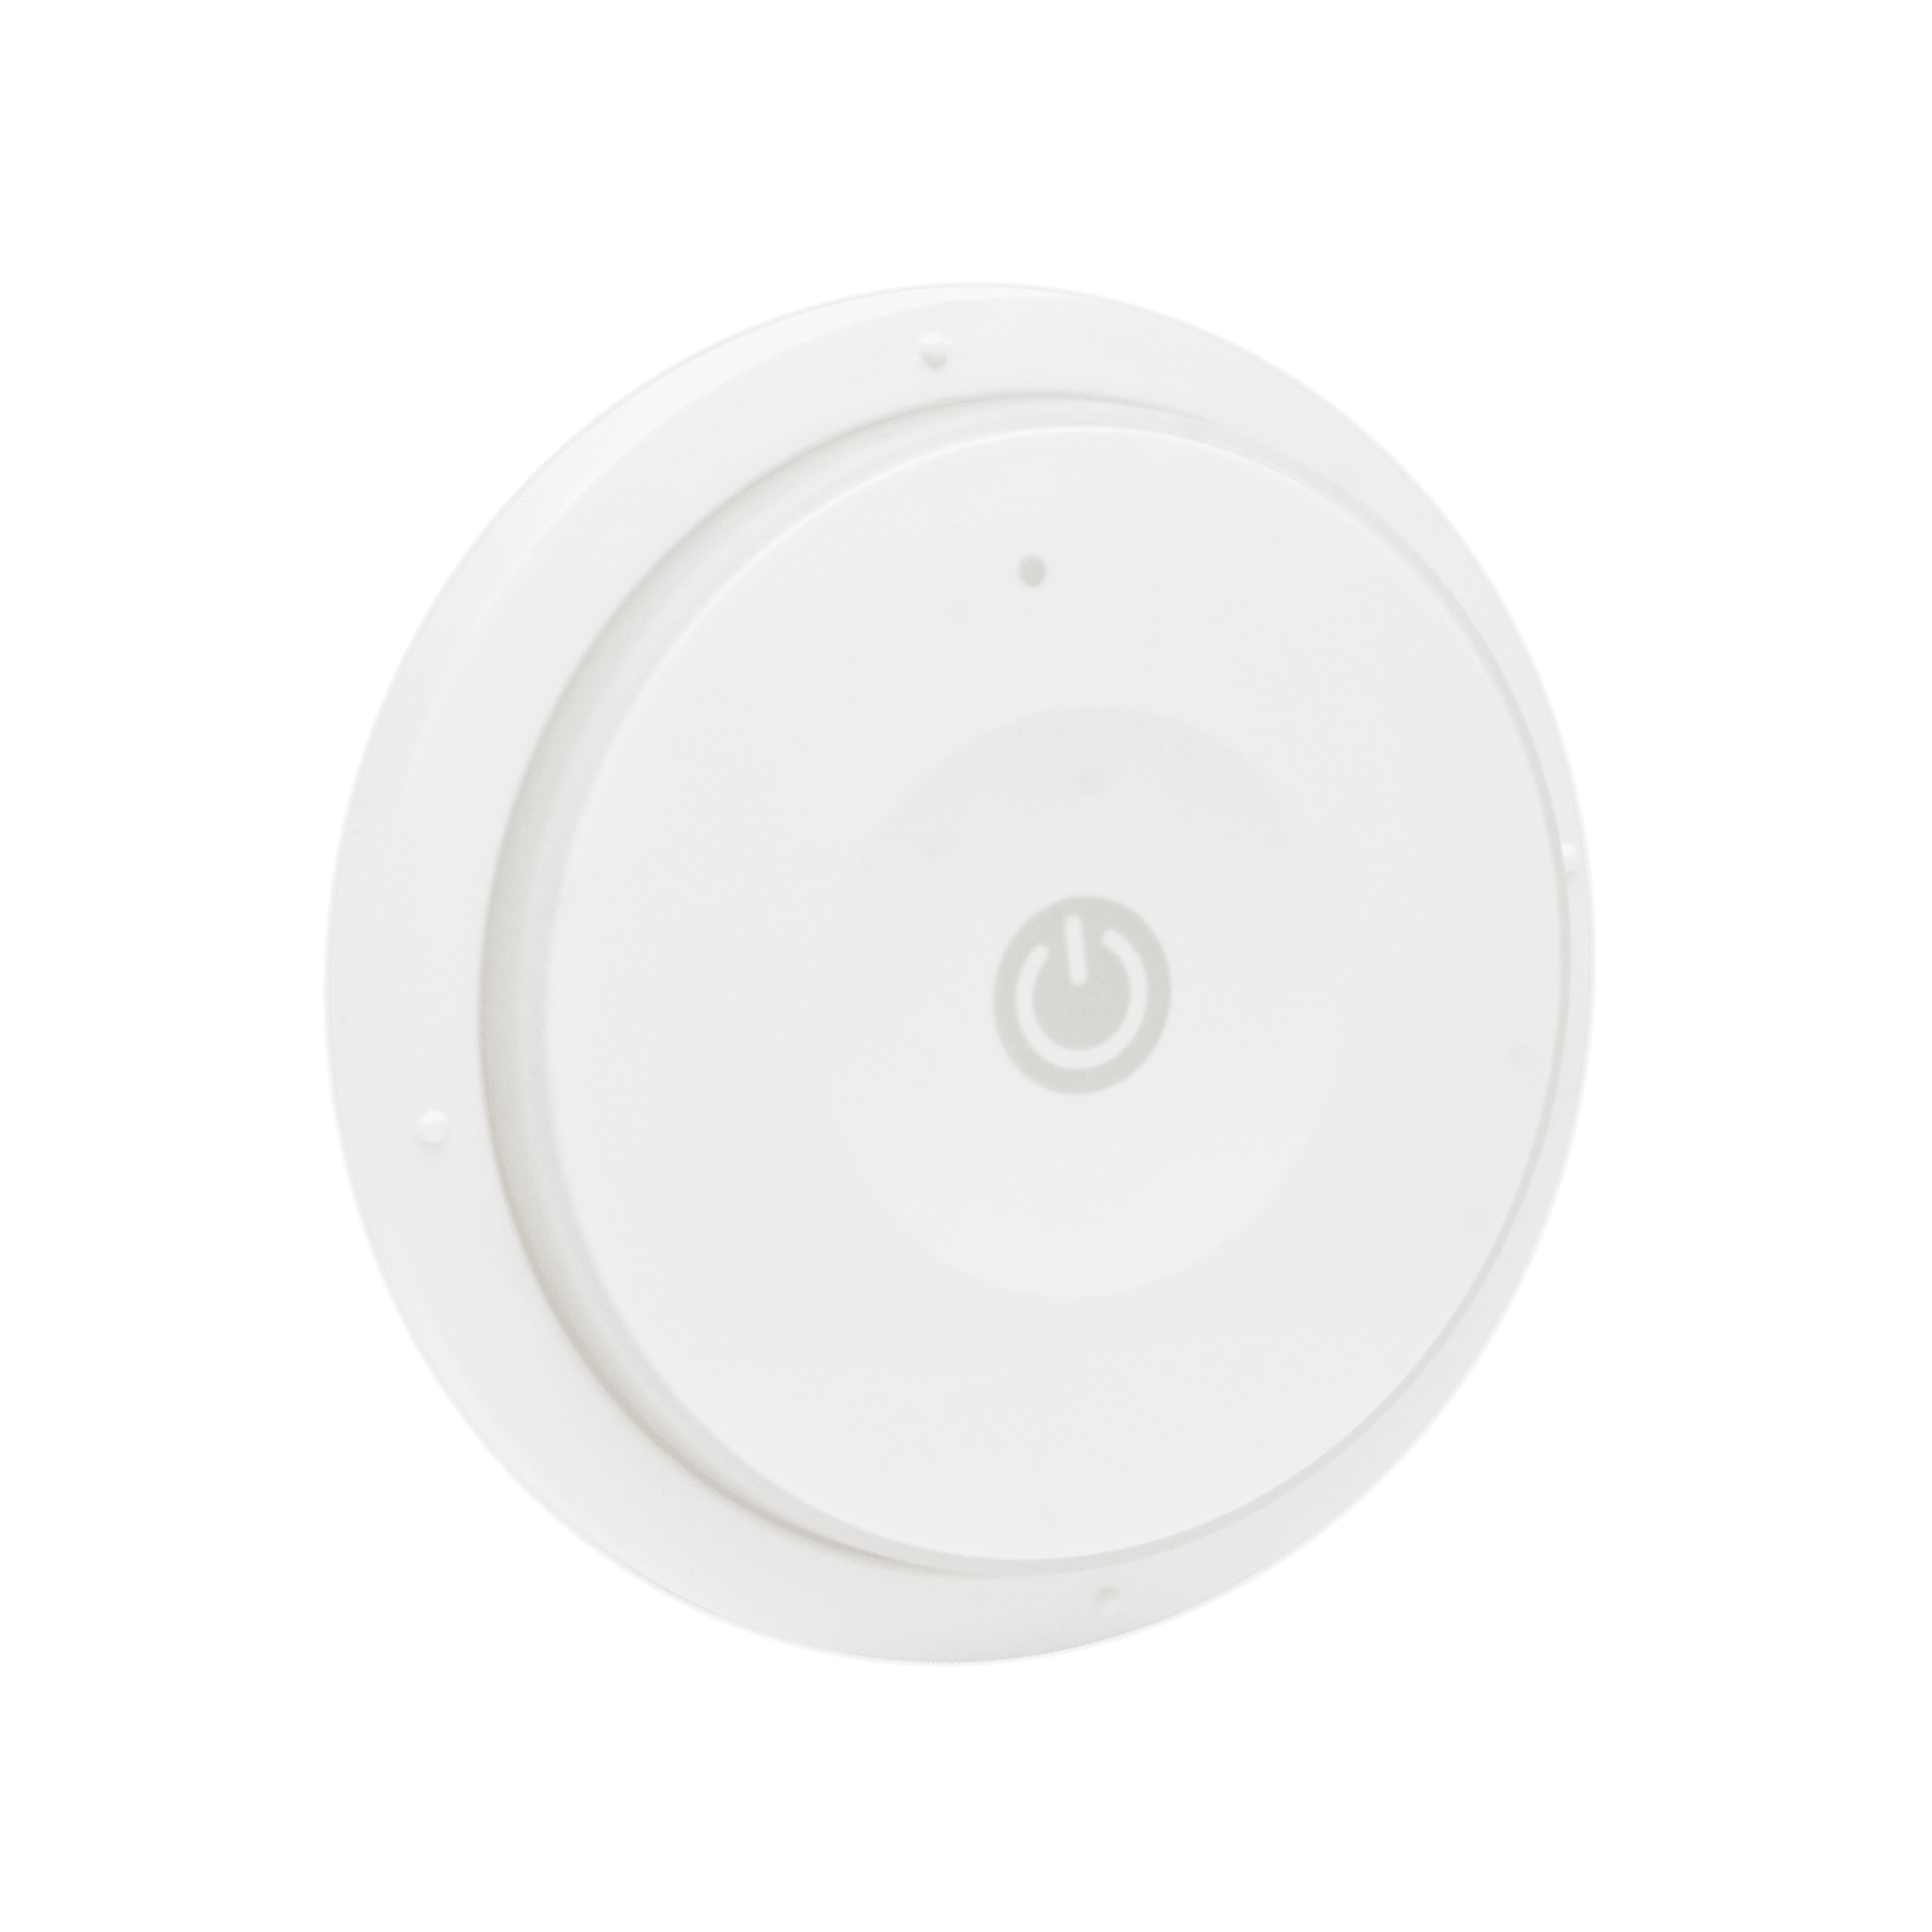 The Ultimate Smart Home Kit - IOTREND